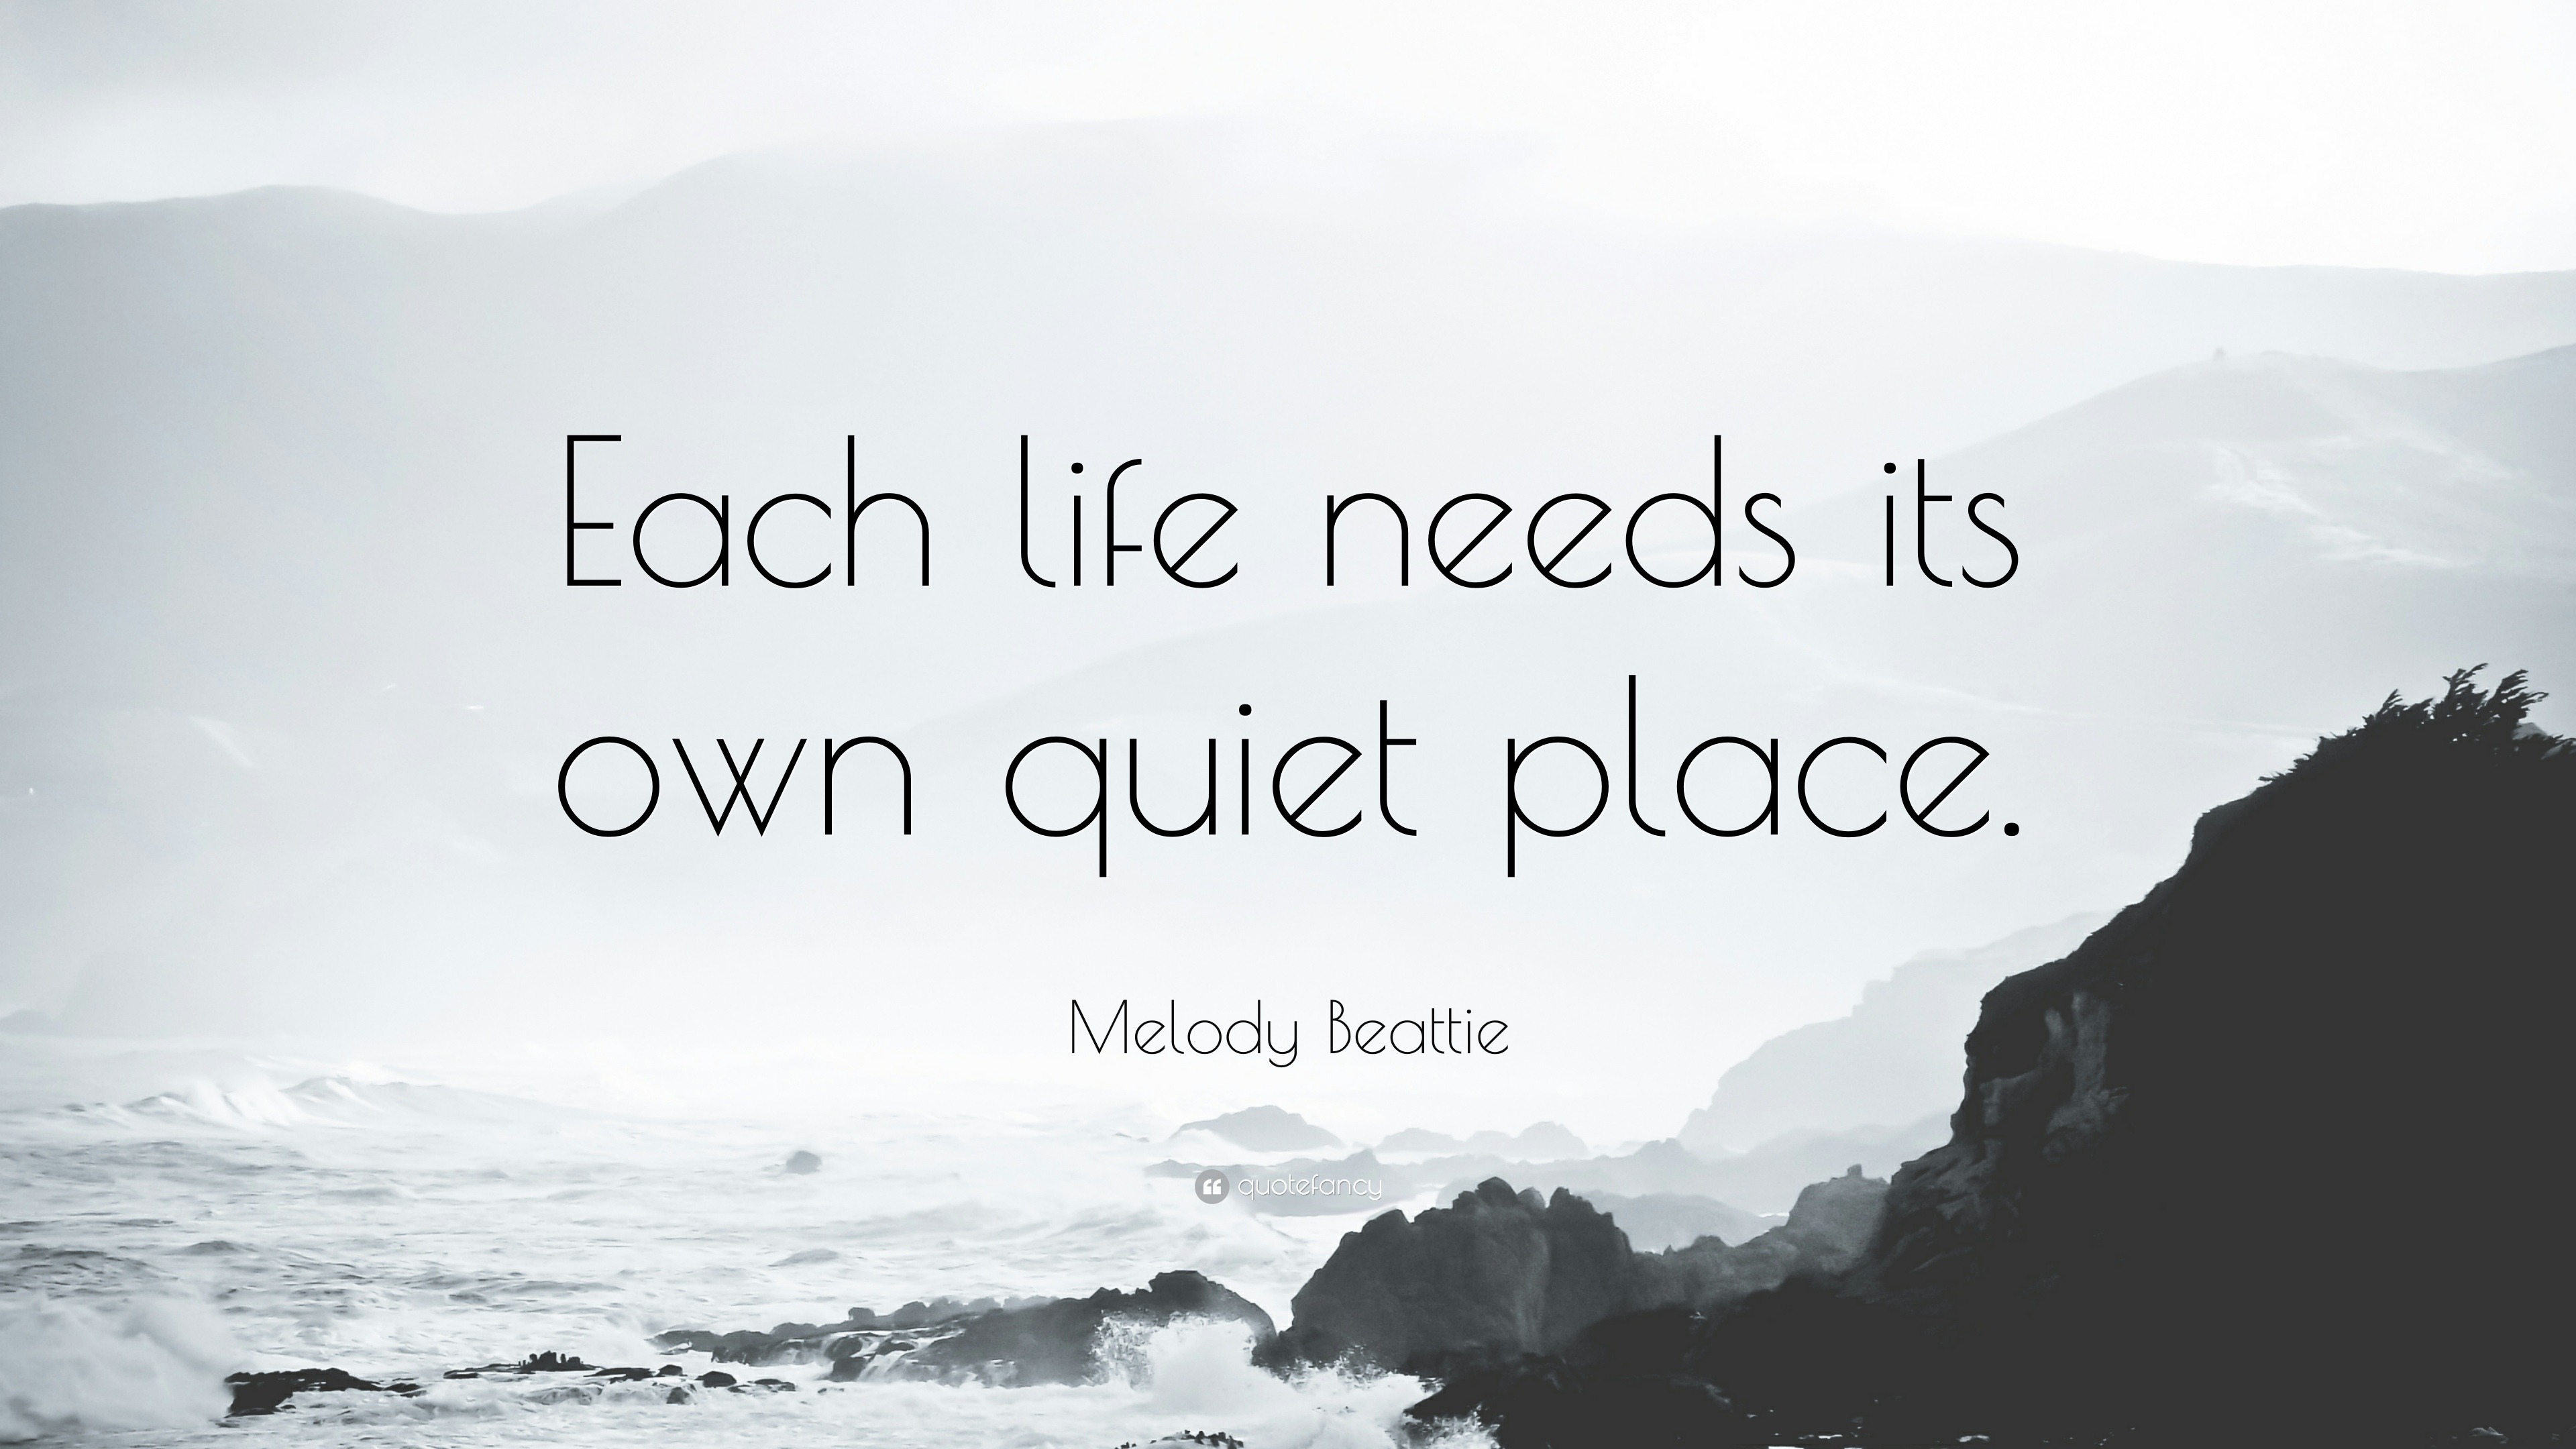 Melody Beattie Quote: “Each life needs its own quiet place.”